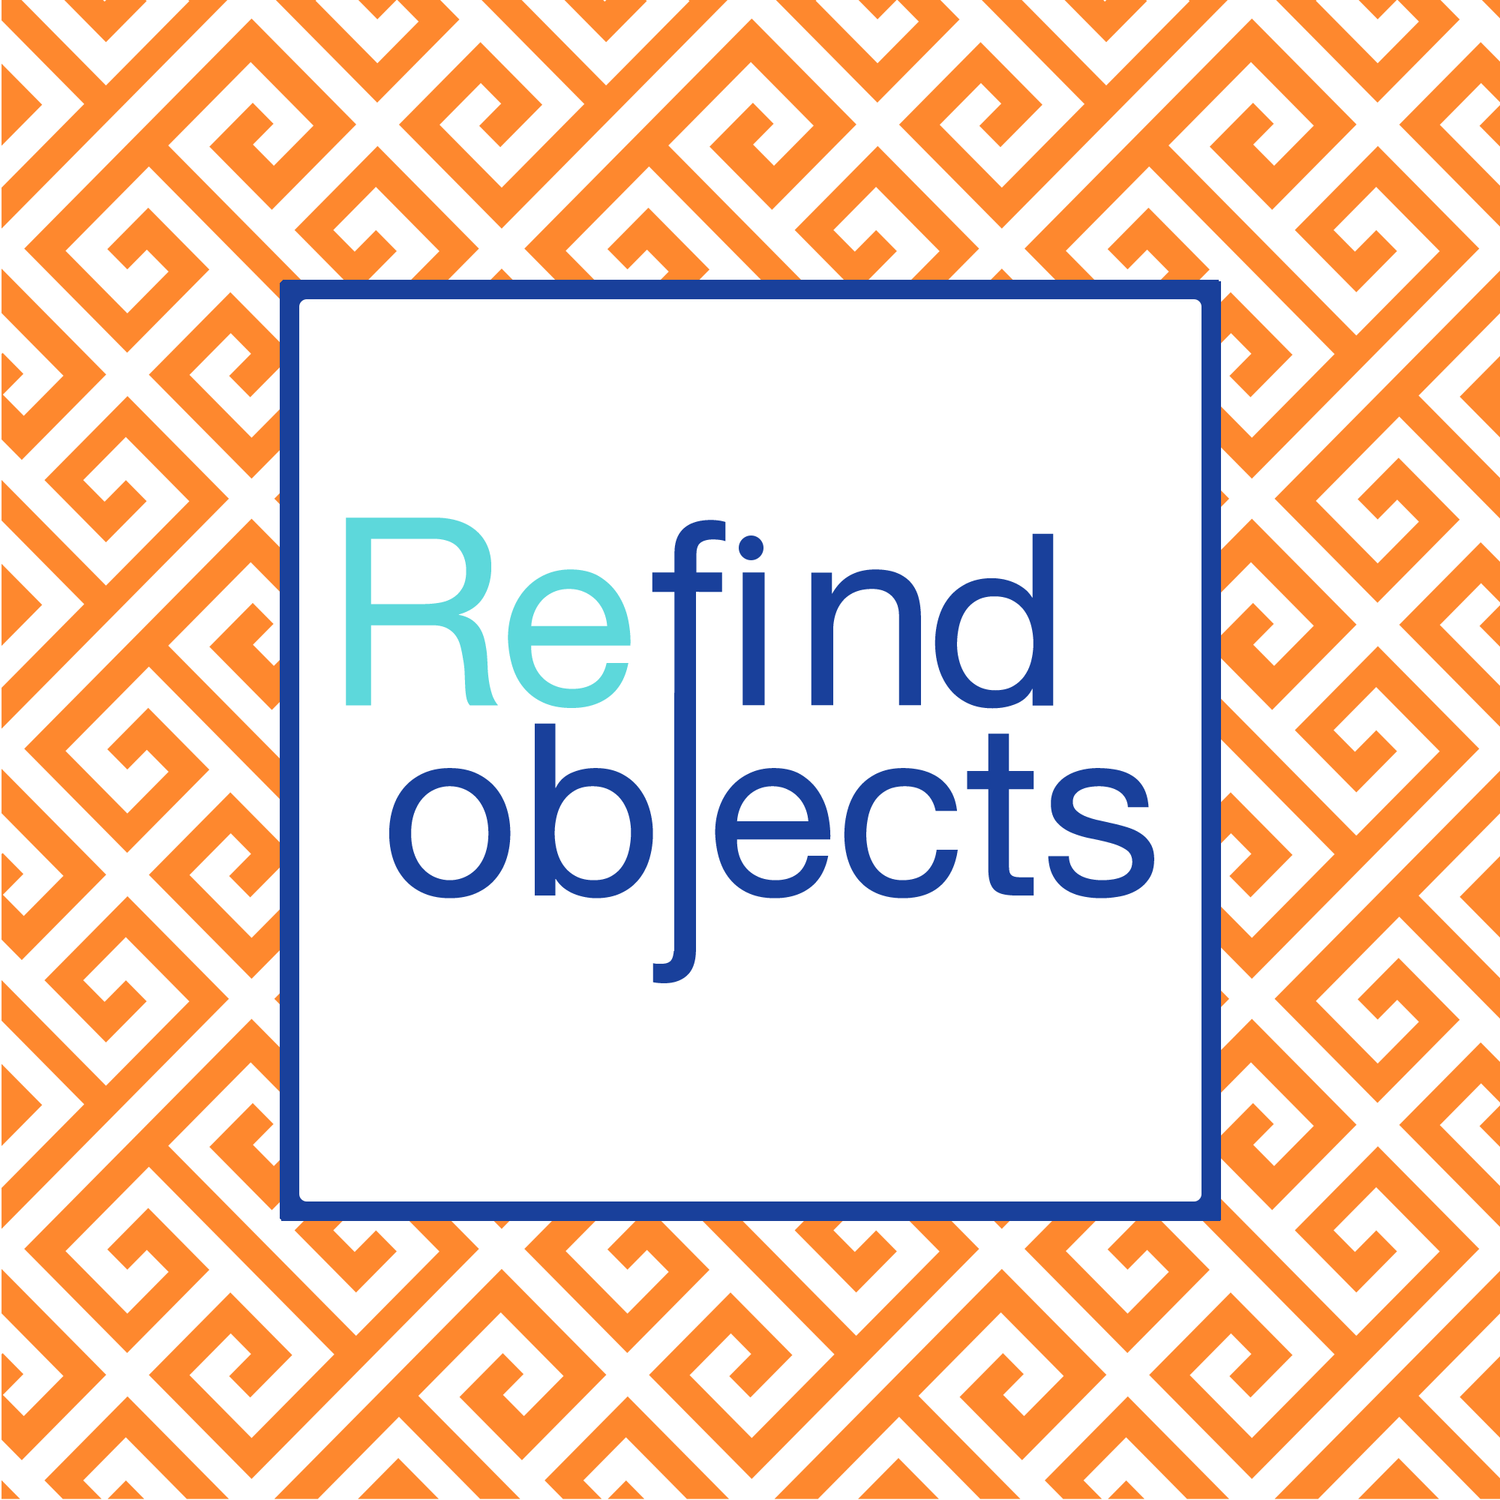 Refind Objects